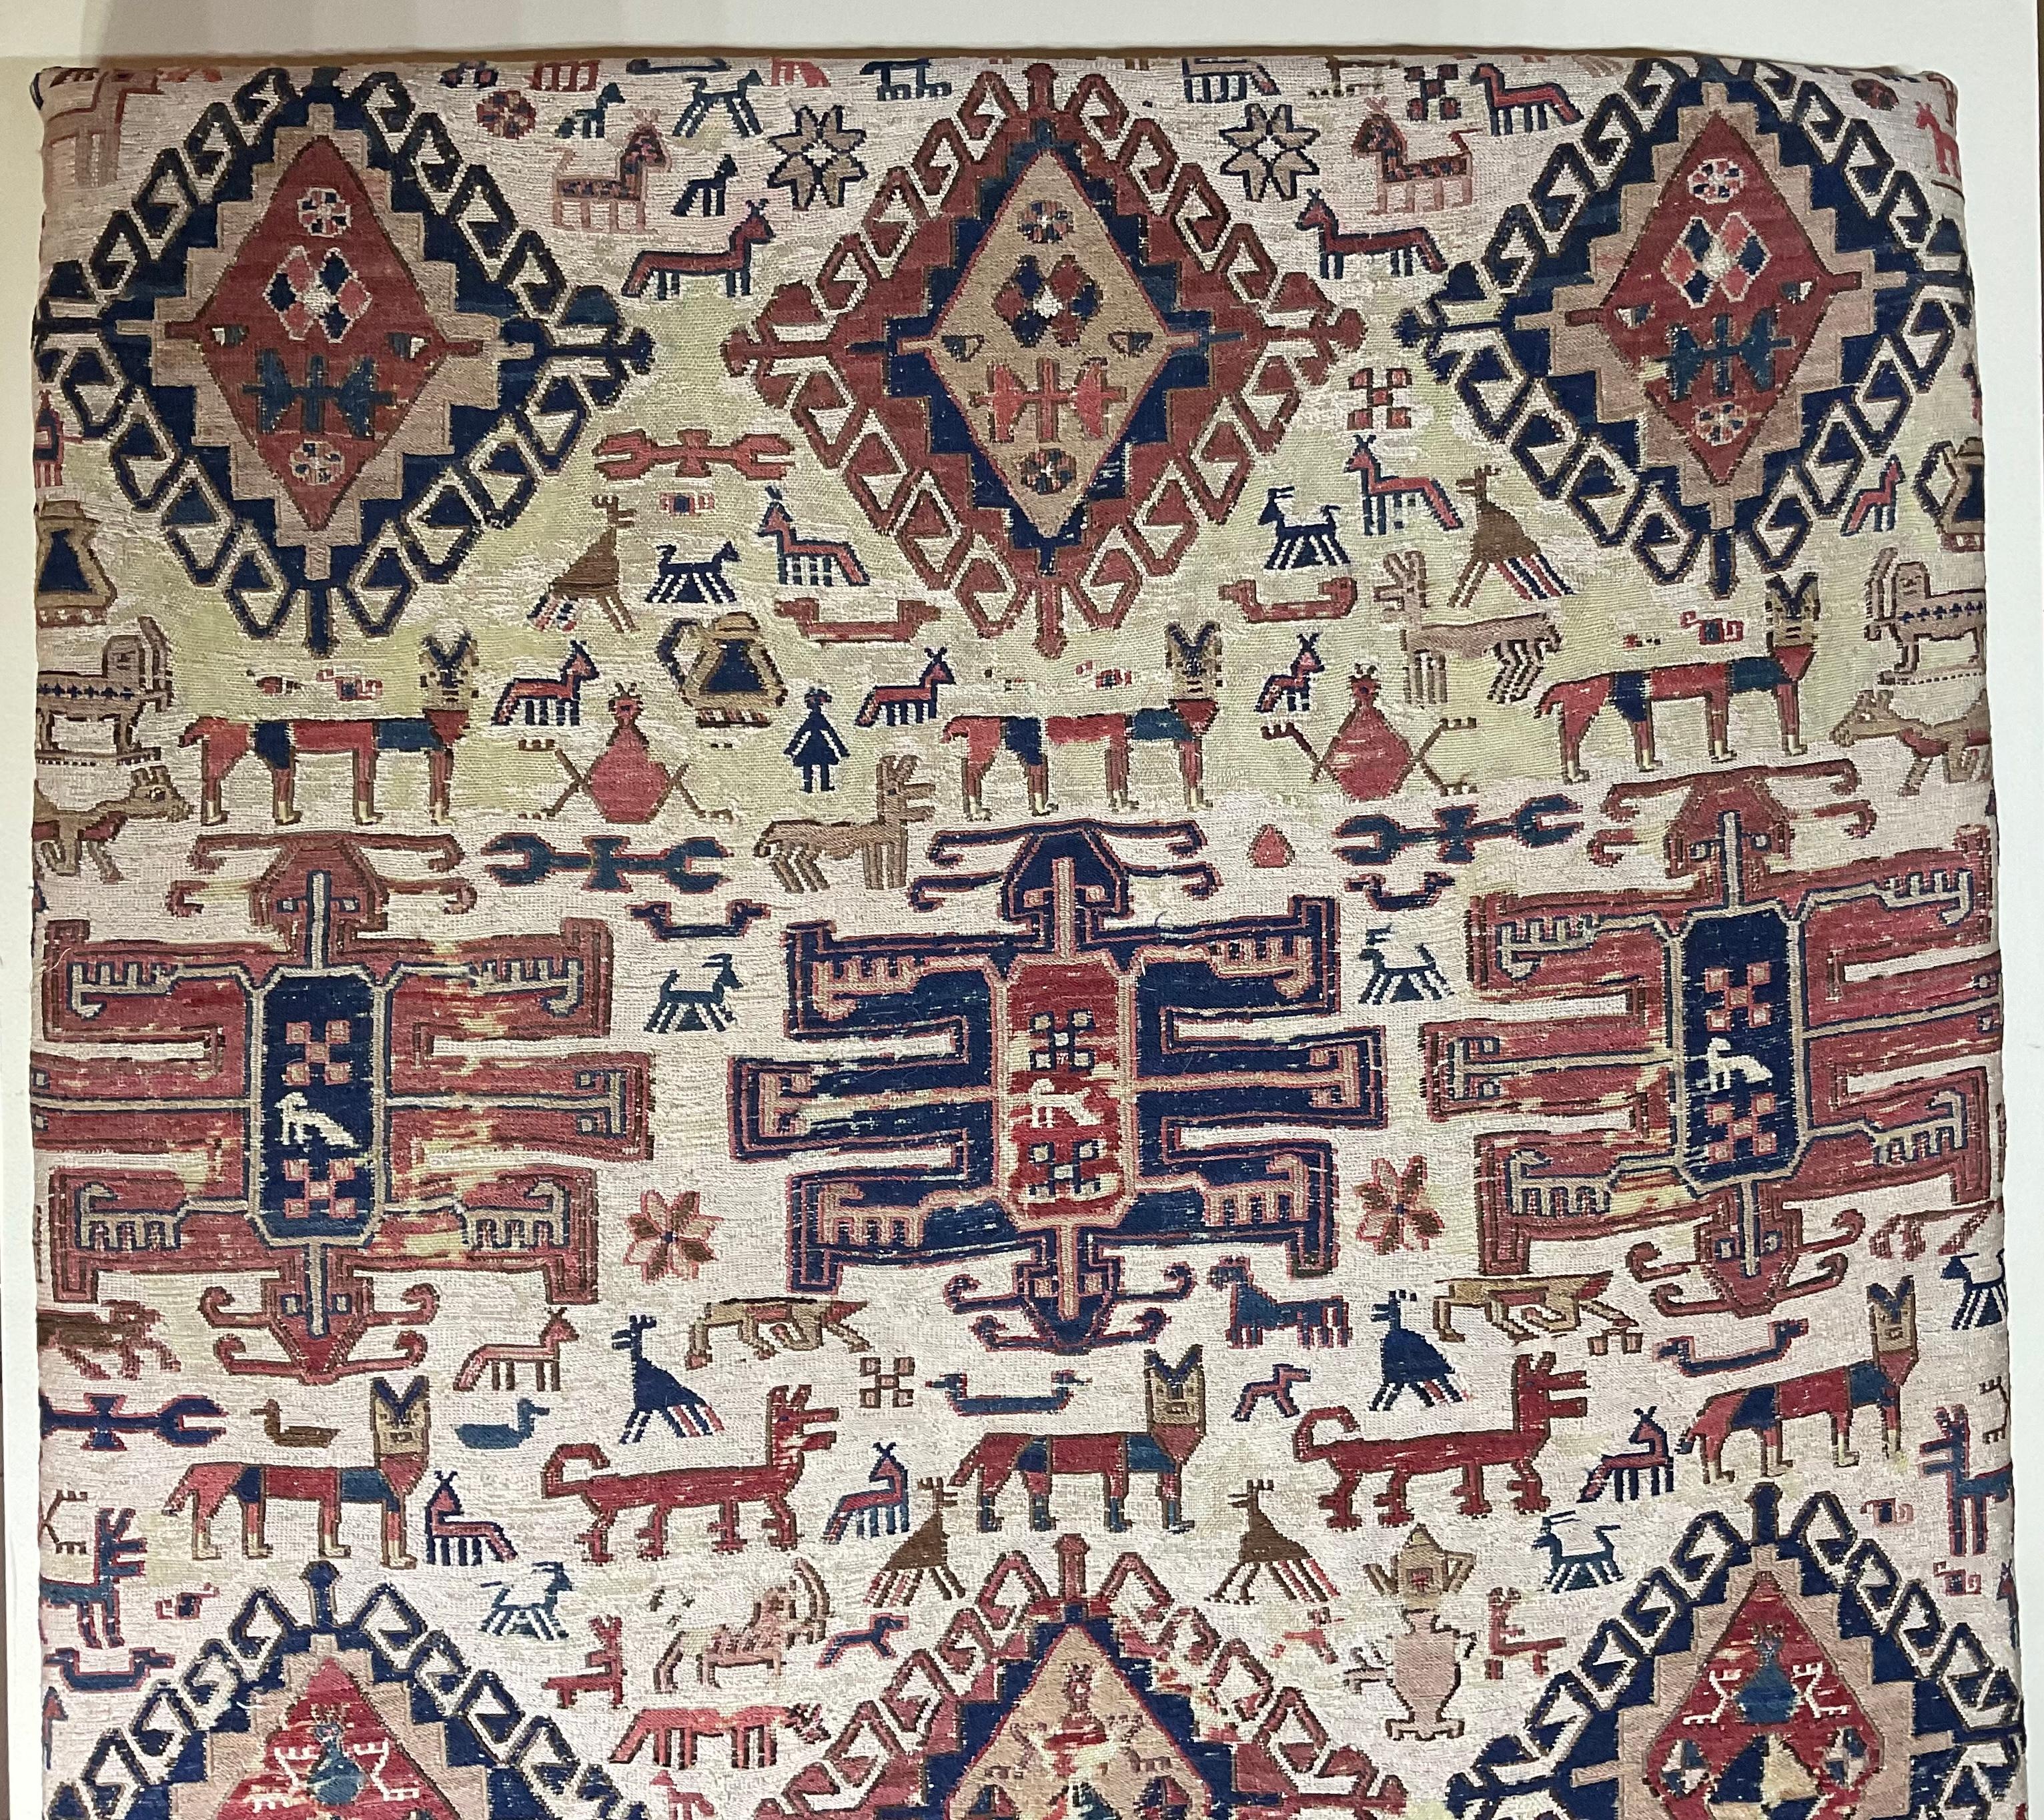 Hand knotted rug in wool and silk, originating from Azerbaijan circa 1920-1930, densely packed pattern of various exceptional tribal Motifs, in beautiful muted colors. This rug was professionally clean and display on wood upholster base do use as a